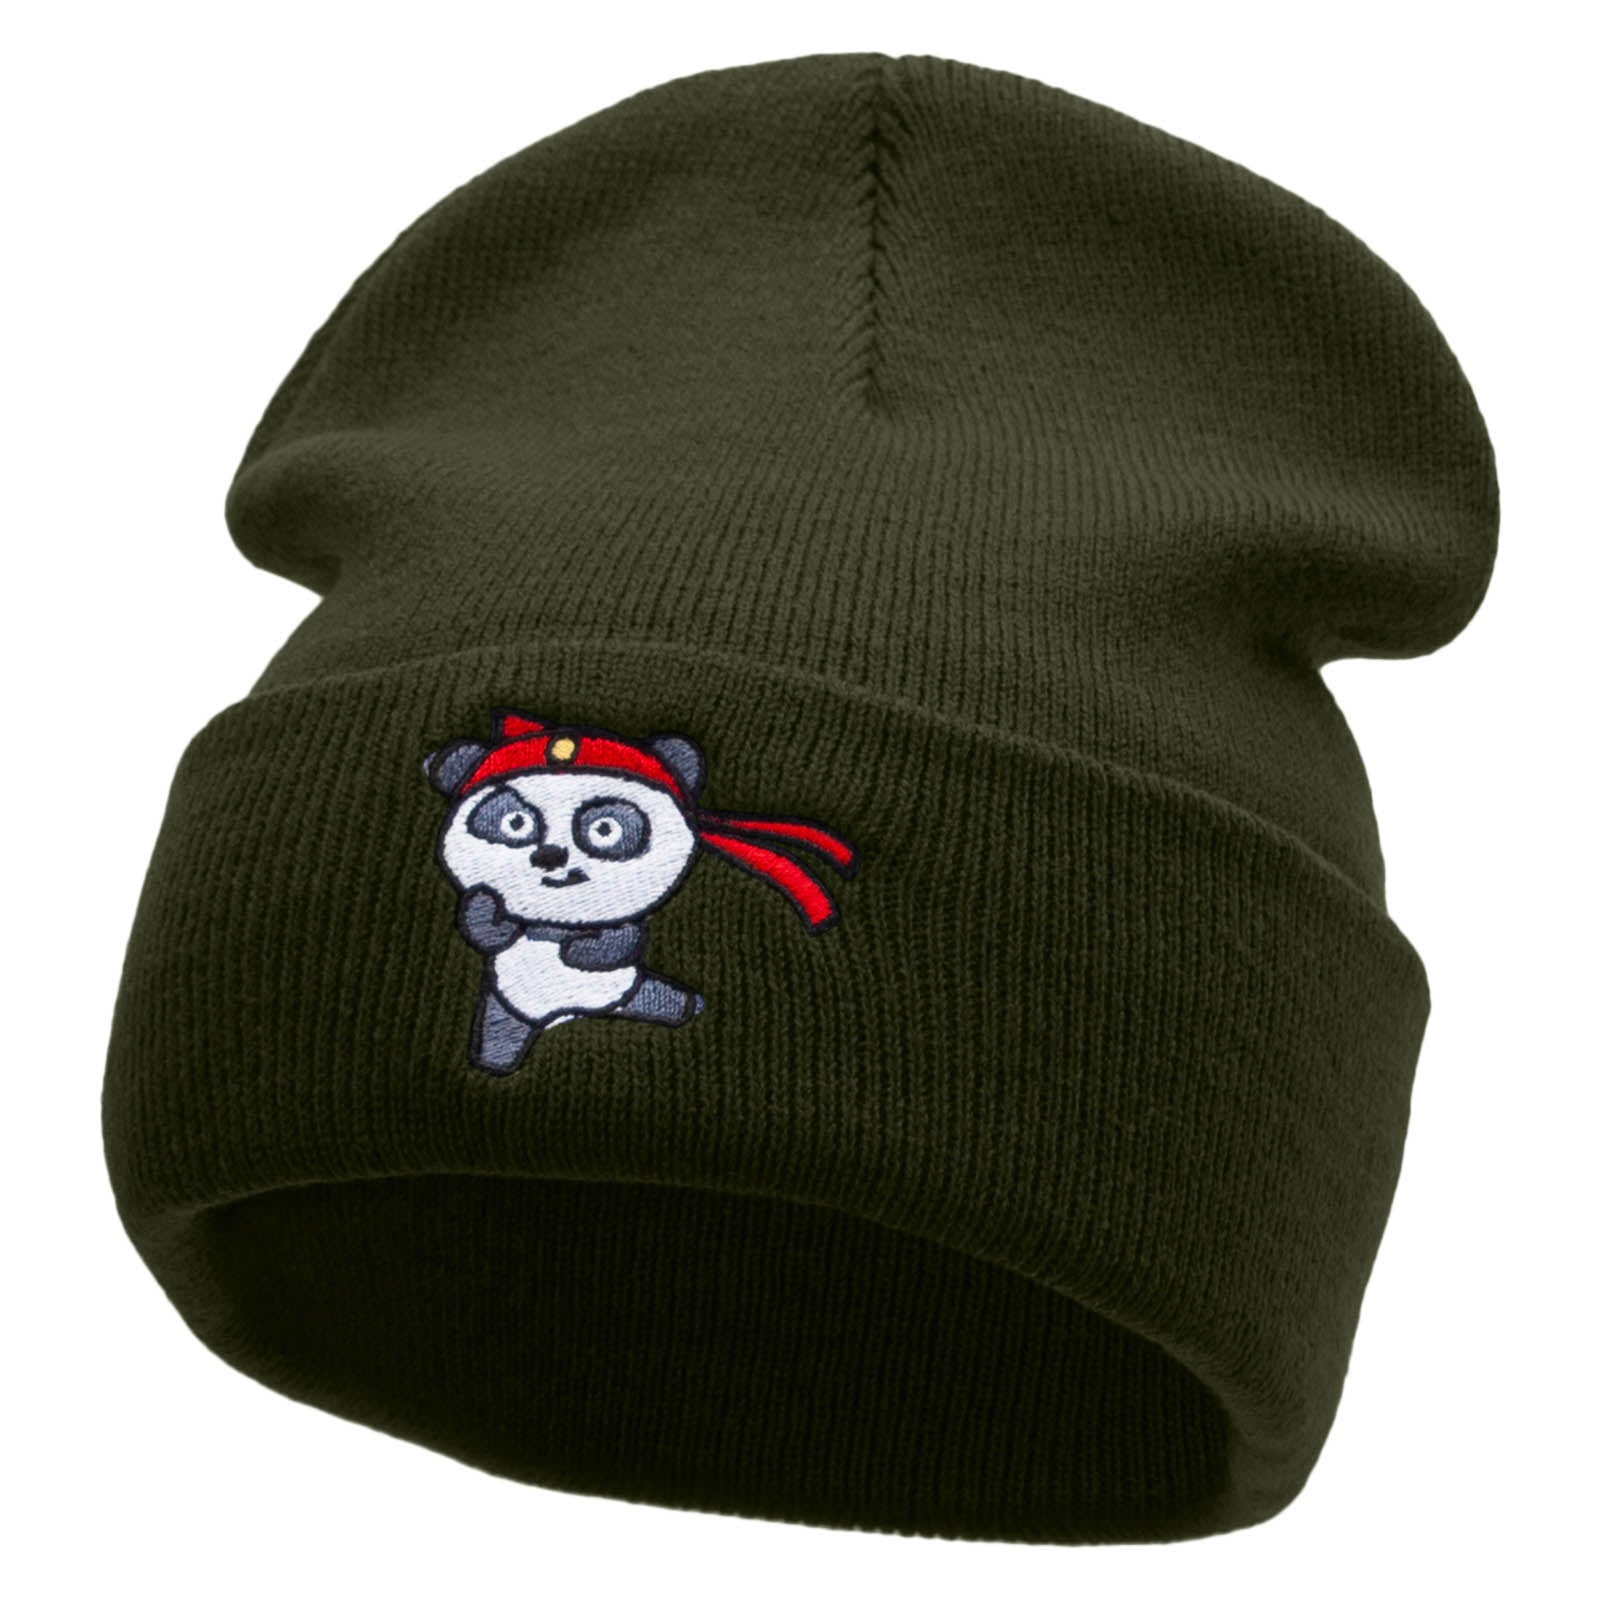 Karate Panda Embroidered 12 Inch Long Knitted Beanie - Olive OSFM